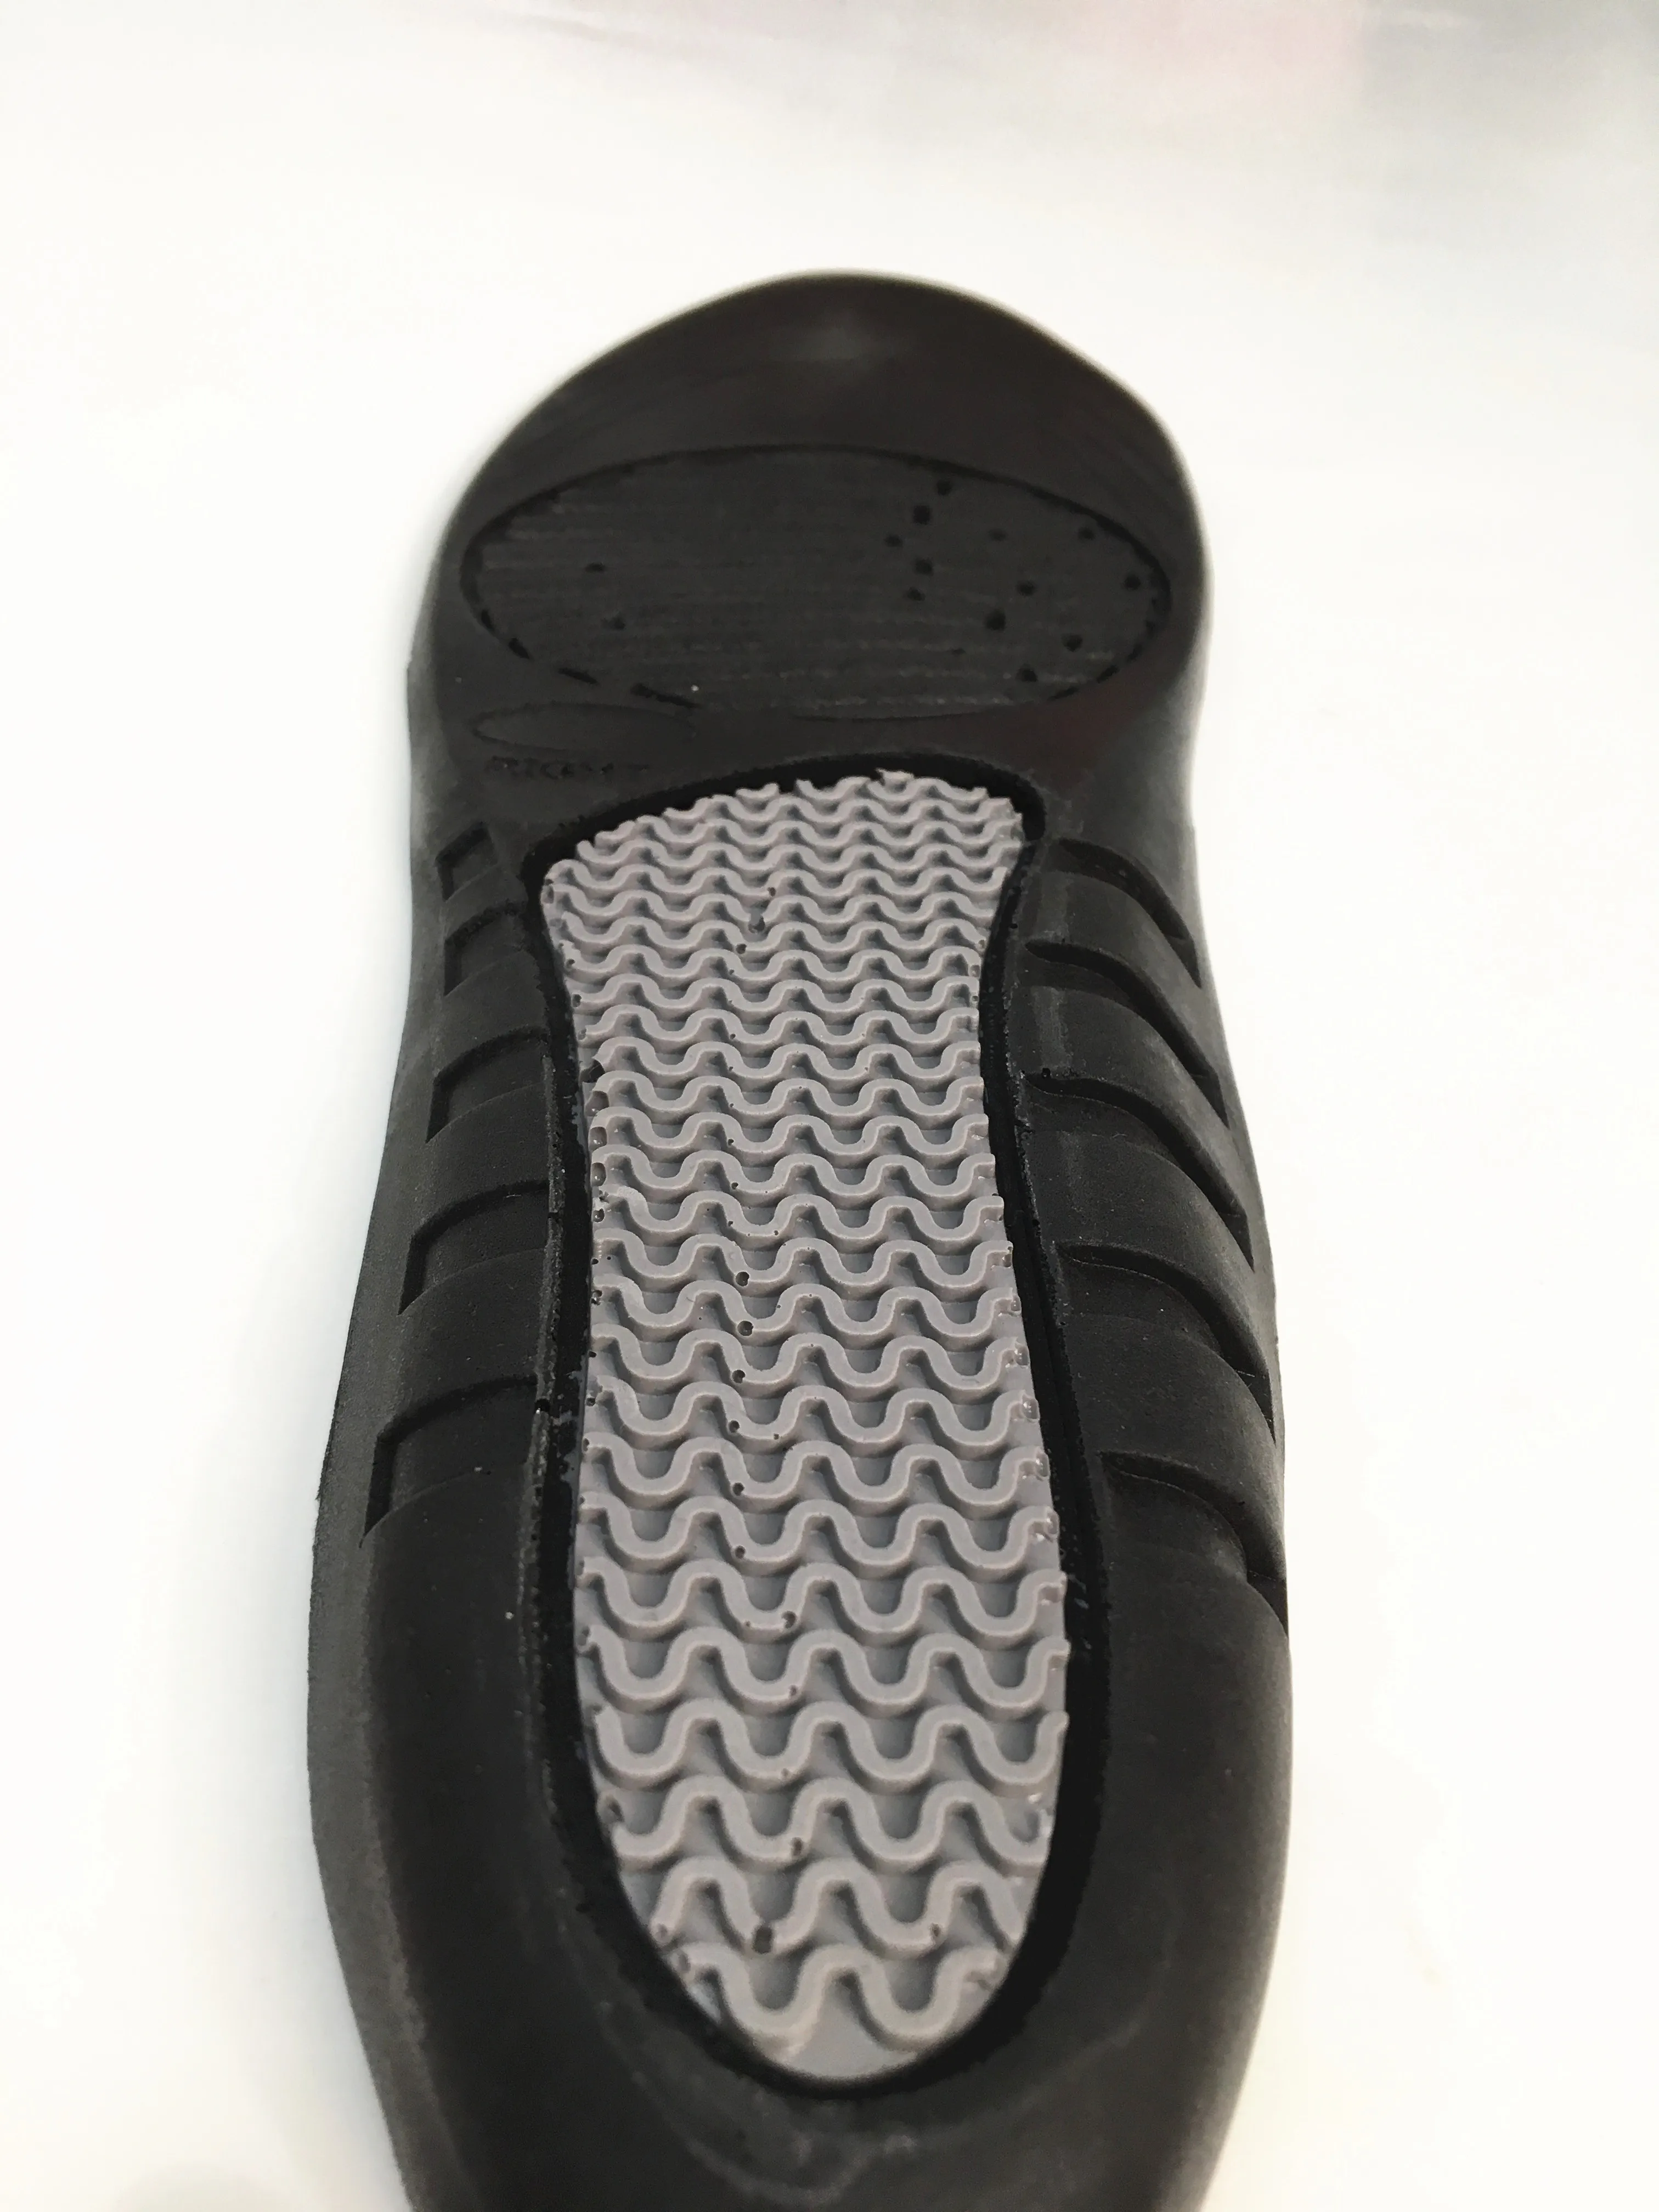 Breathable Shock Absorption Sport Shoes Insole Foam For Shoe Insoles ...